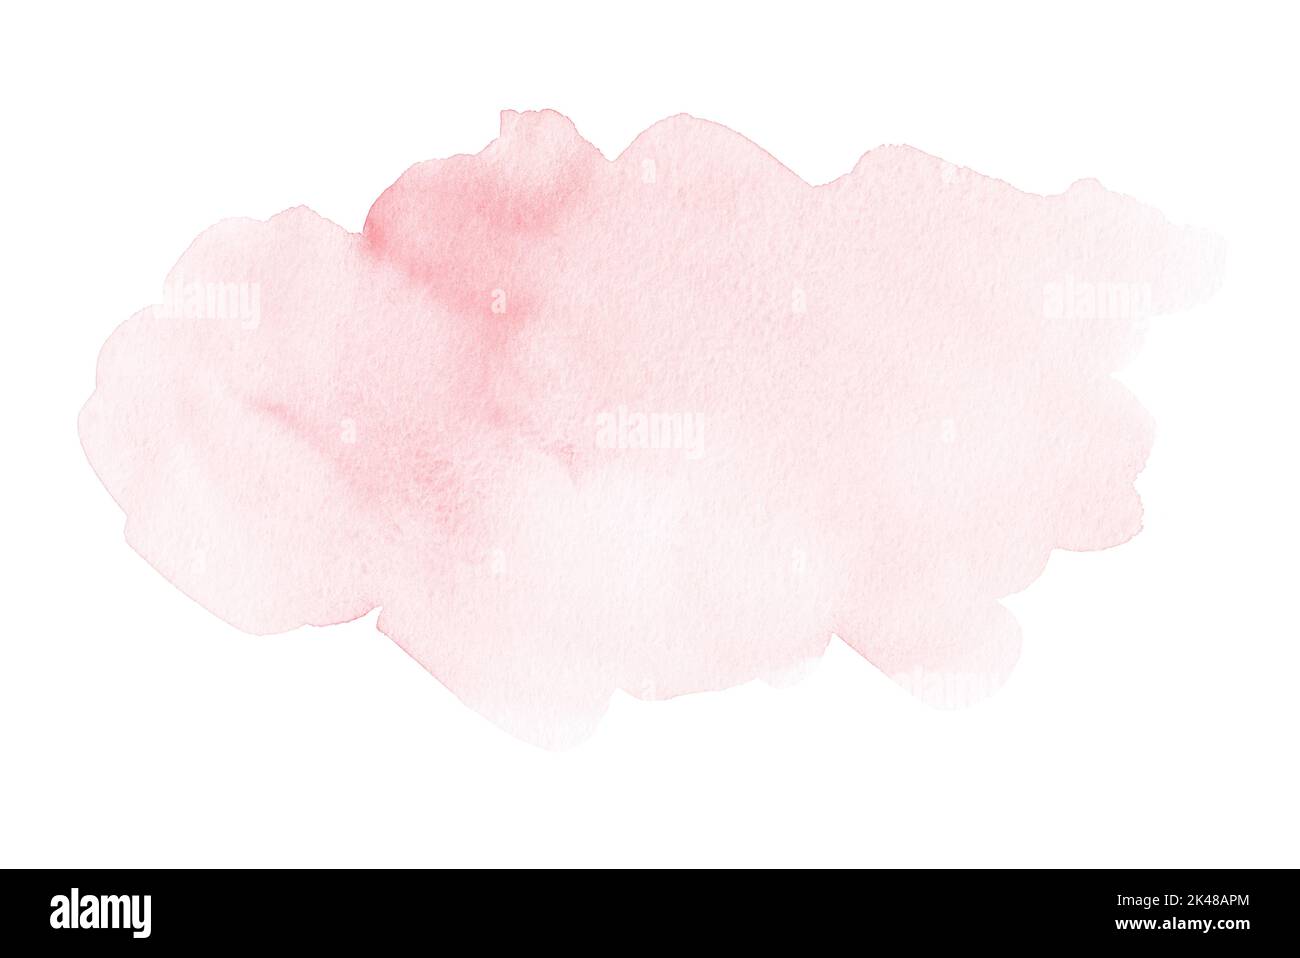 Abstract pastel pink watercolor spot on white background. Watercolour blot with space for text. Hand painted isolated illustration with copy space. Stock Photo